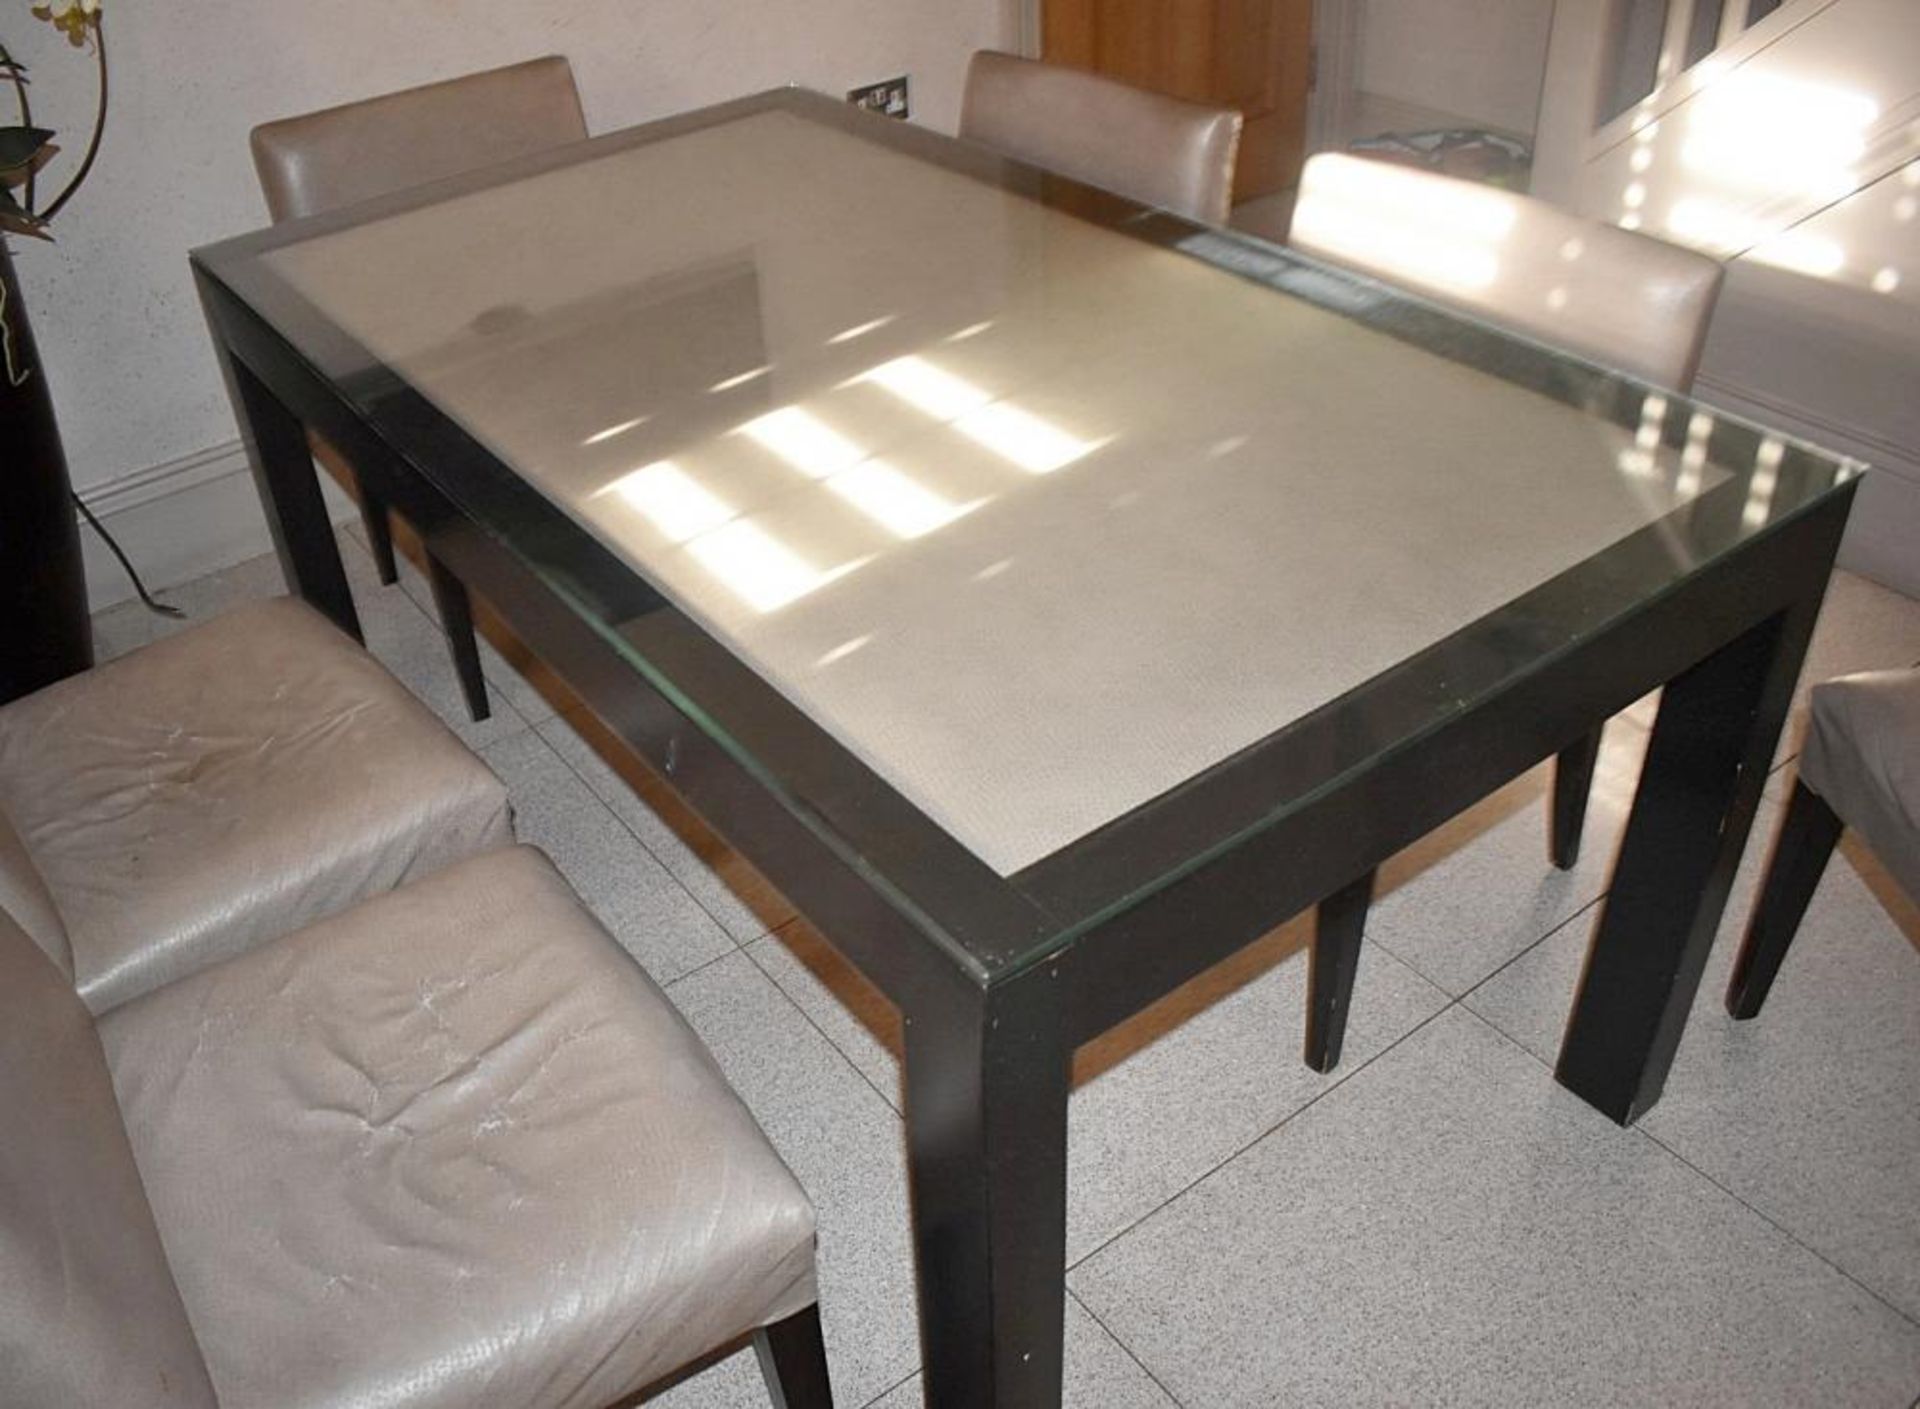 1 x Inset Leather And Glass Topped Kitchen Dining Table With 6 x Chairs In A Light Fawn Leather - R - Image 5 of 6